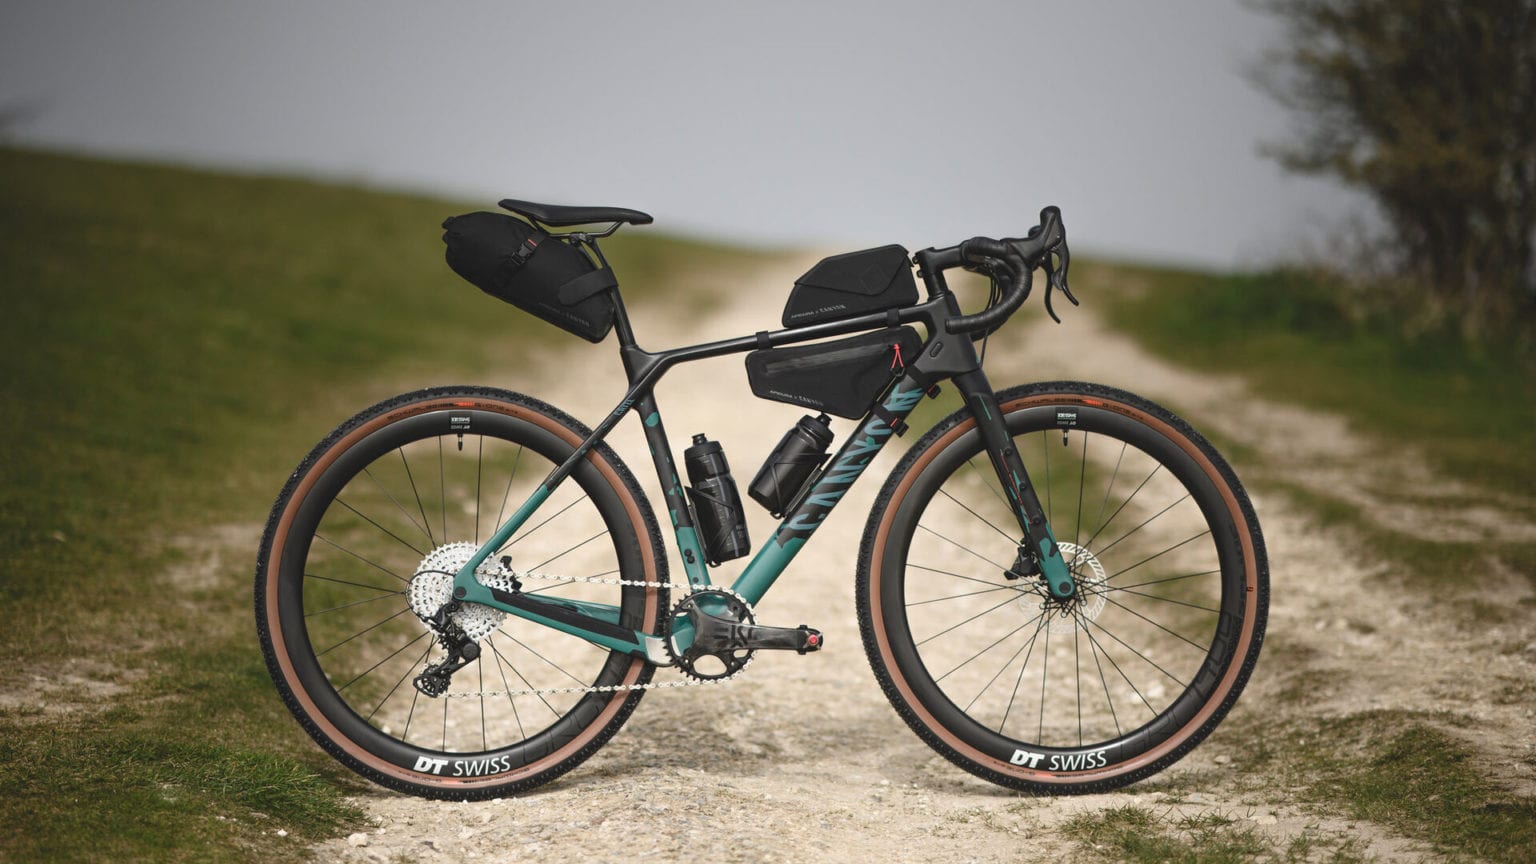 The new Canyon Grizl gravel bike is designed for rougher roads